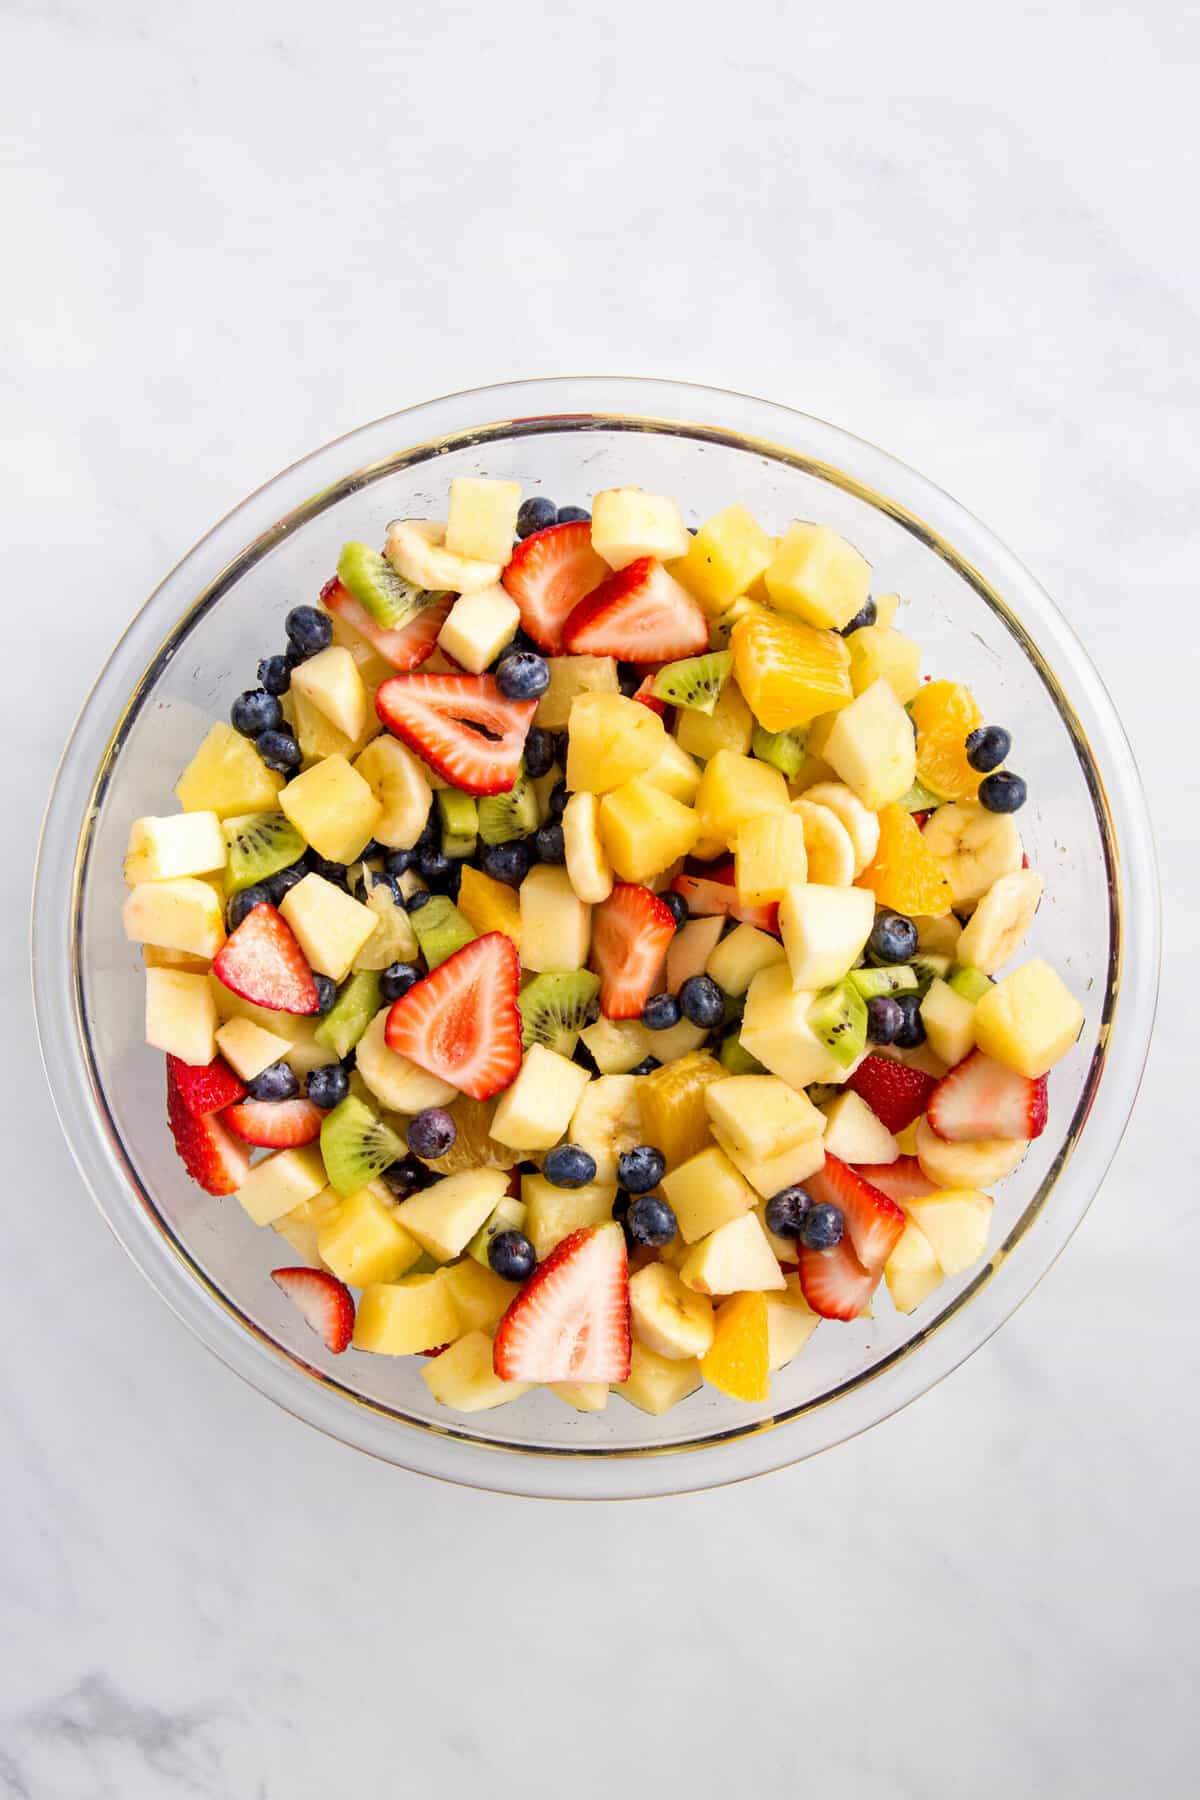 cut up strawberries, bananas, kiwi, oranges, pineapple, and fresh blueberries in a large glass bowl